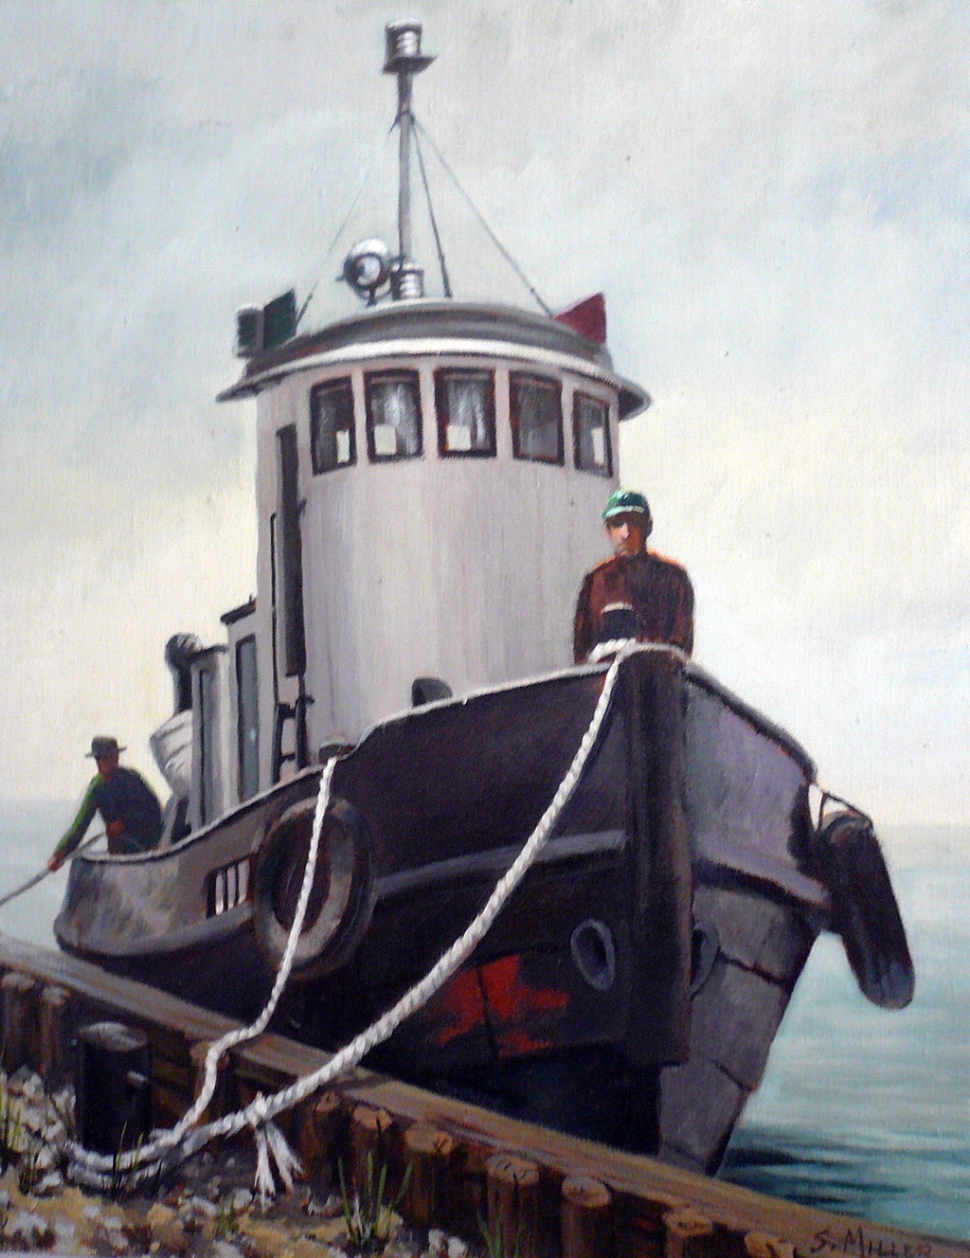 “Tugboat” oil on canvas by Sally Miller.